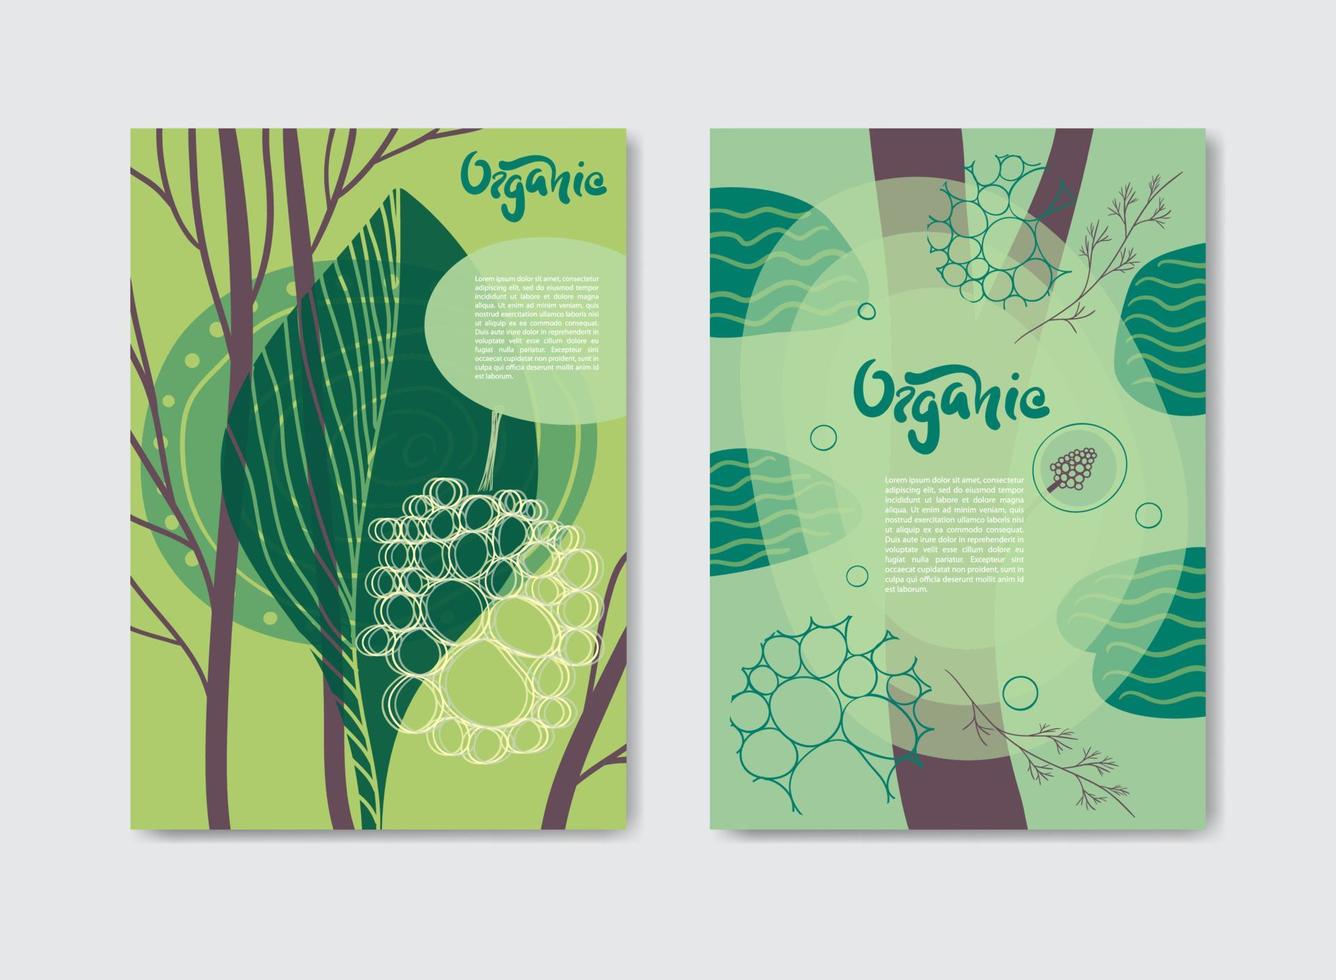 Eco covers, templates set, posters in memphis and hipster style with geometric and nature elements. Vector illustrations